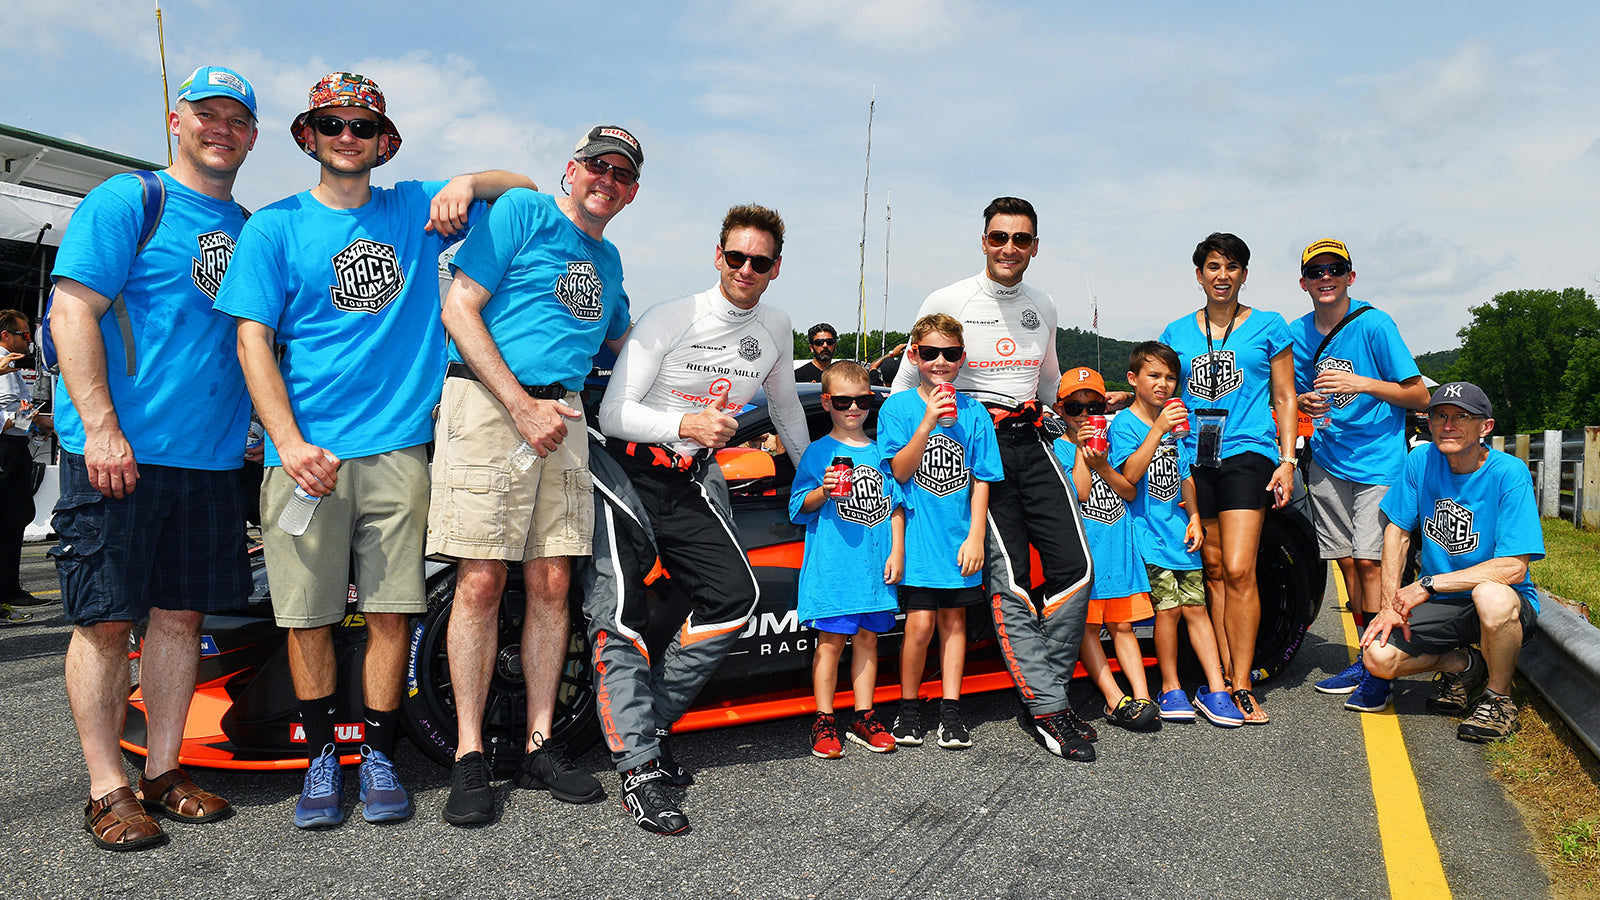 Race Day Foundation employees with children on a racetrack